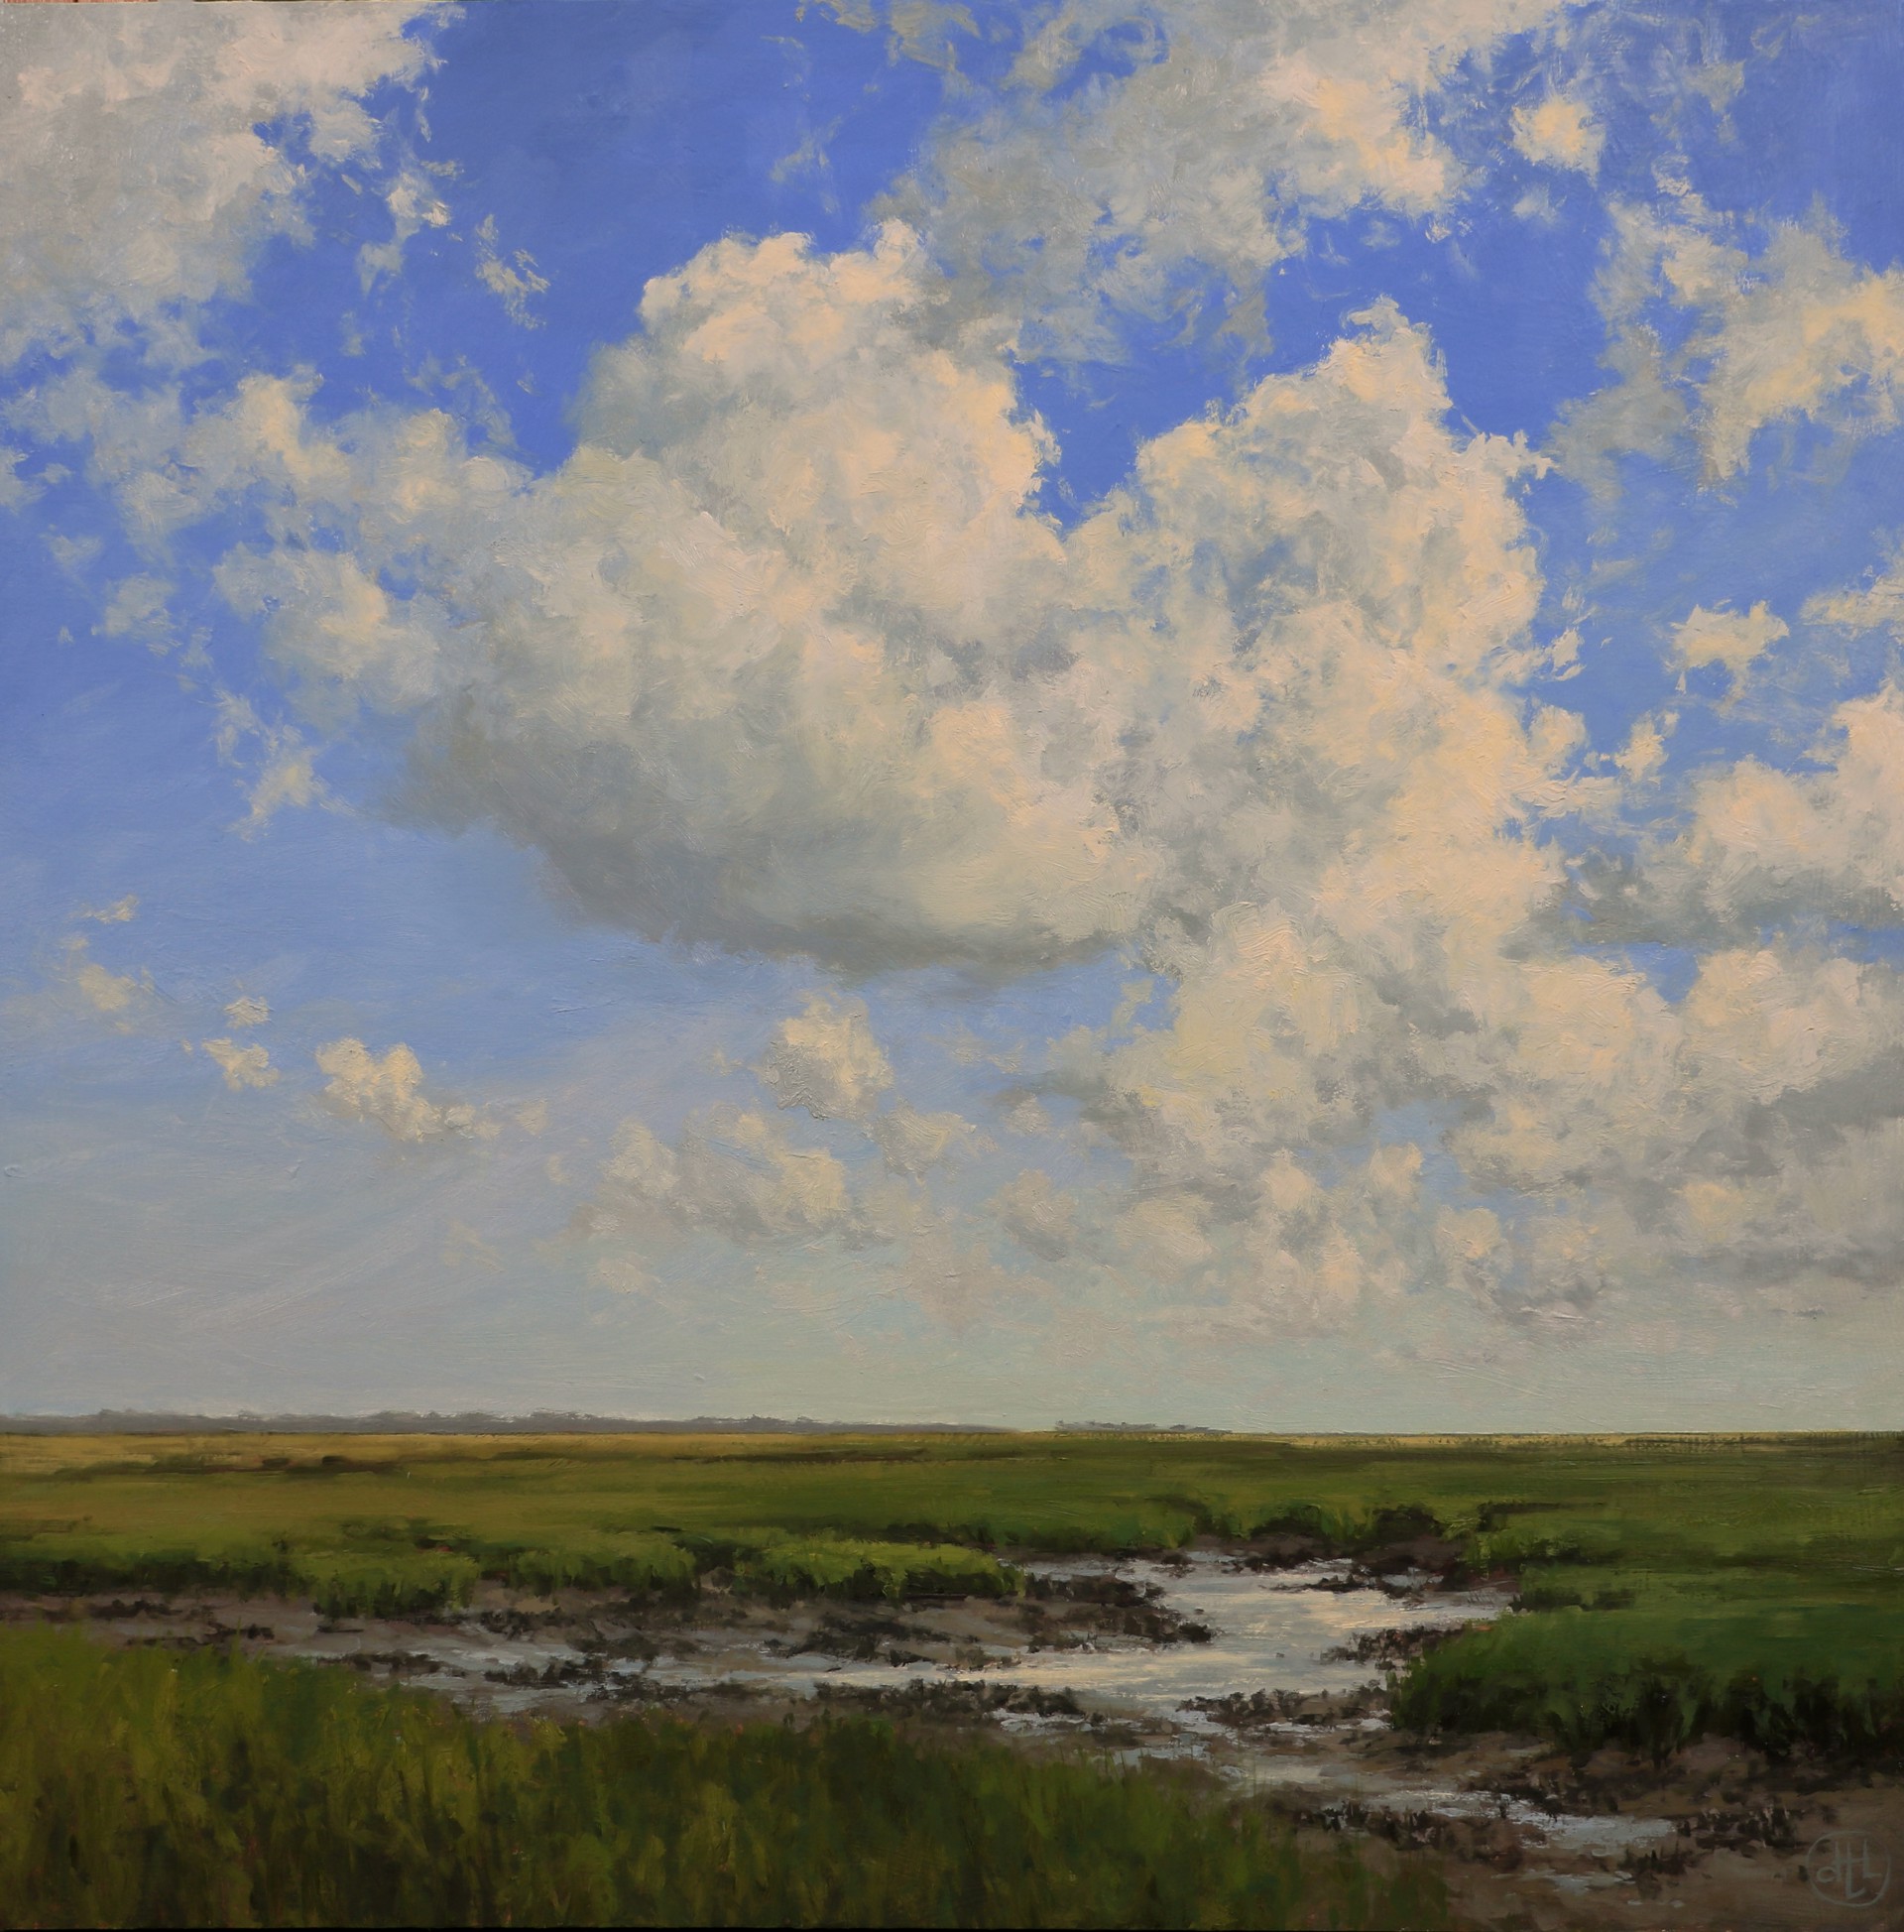 Scattered Clouds by Dottie Leatherwood